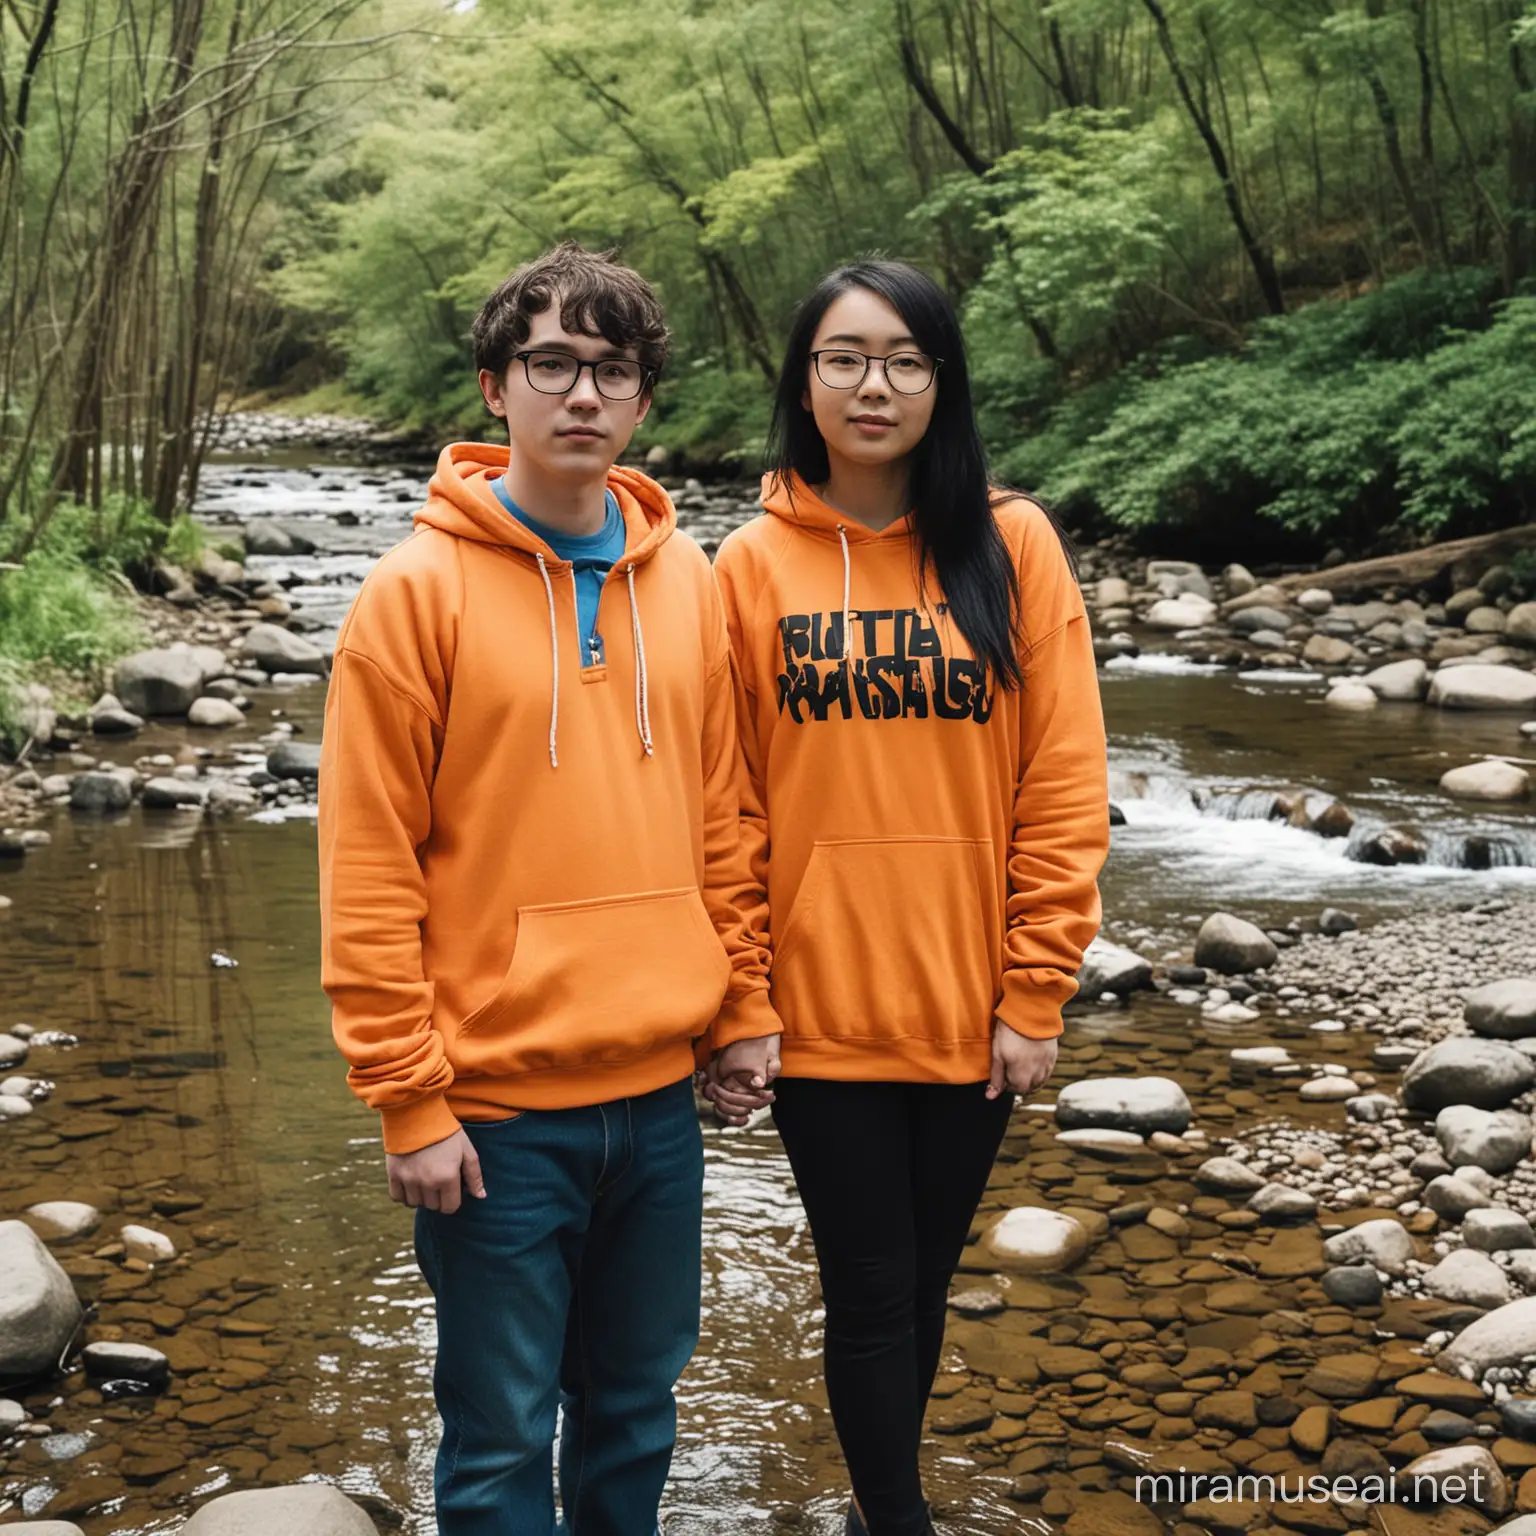 Fat white kid with glasses and orange hoodie holding hands with a skinny beautiful half black half Japanese girl in a blue shirt by a creek